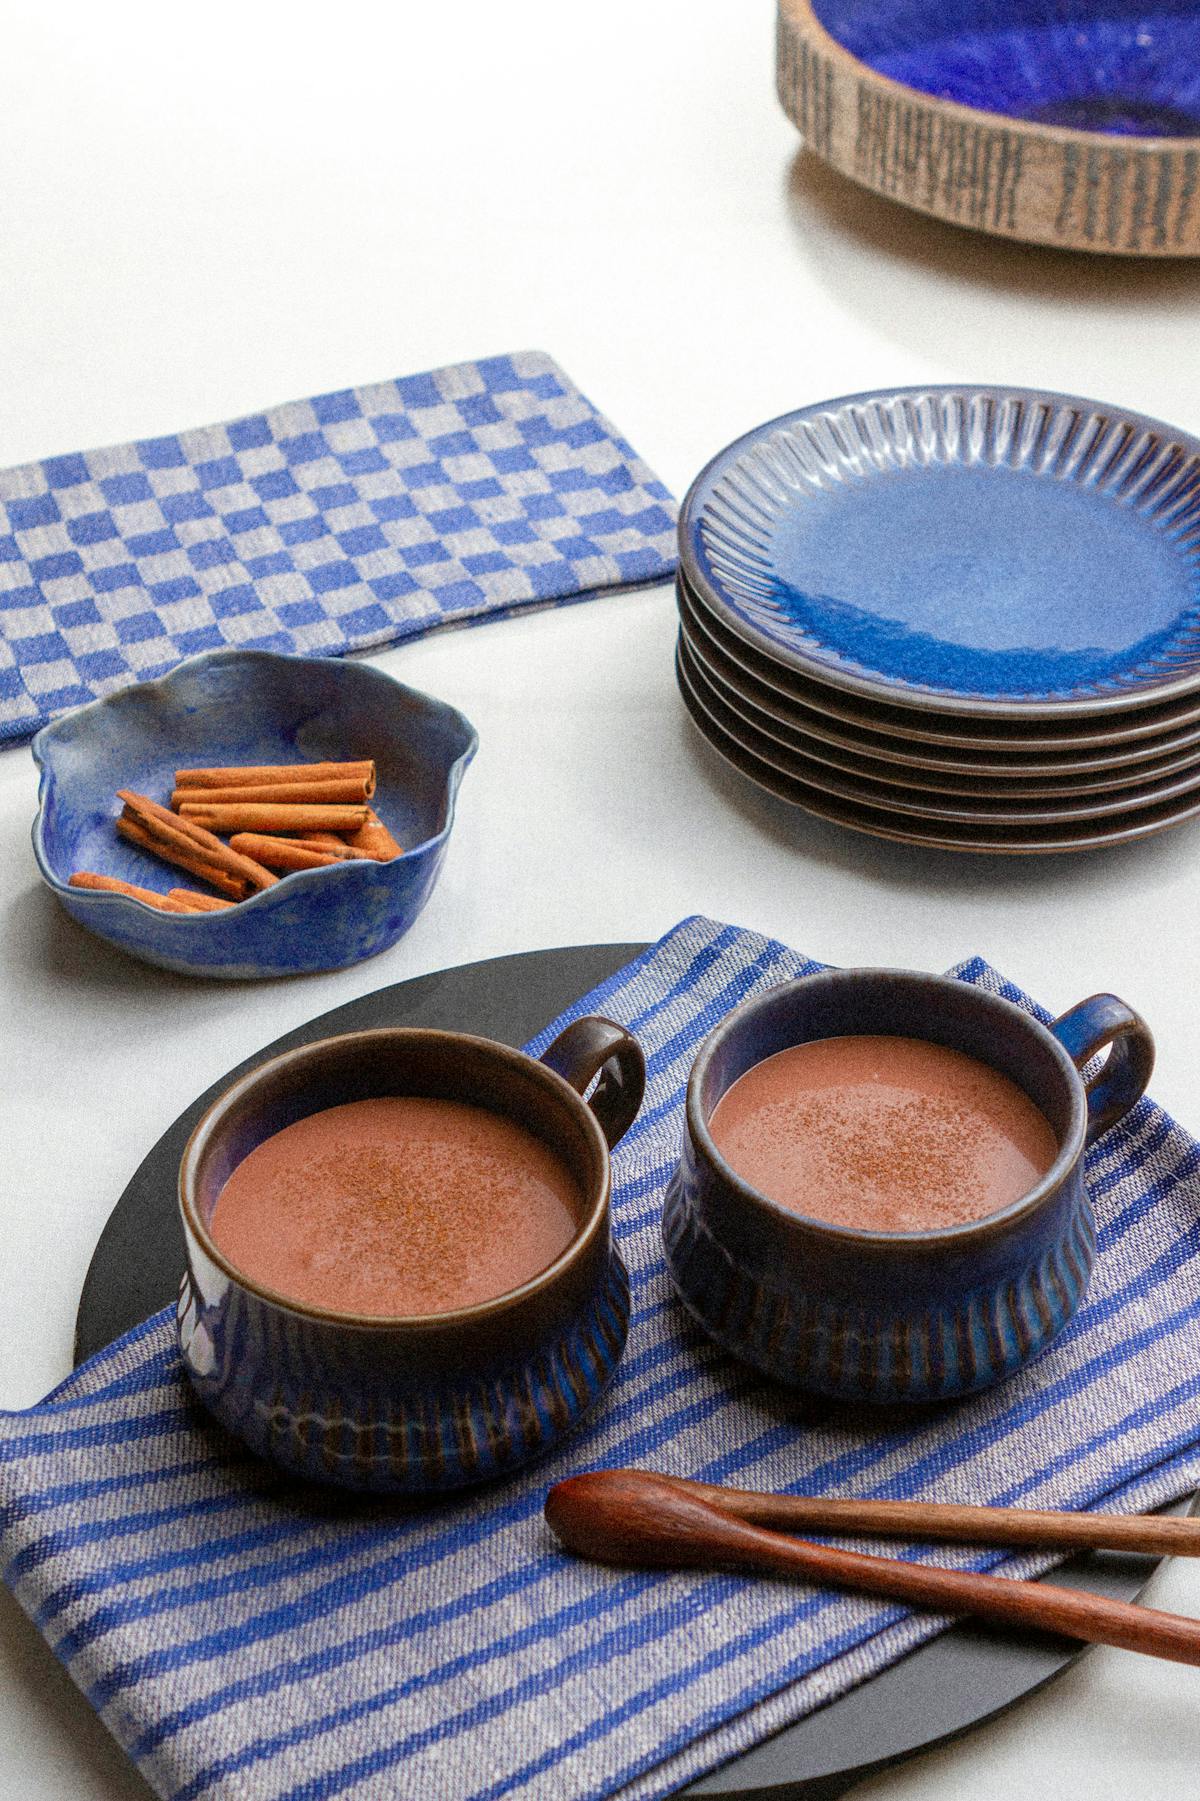 Low-carb Mexican hot chocolate (champurrado)